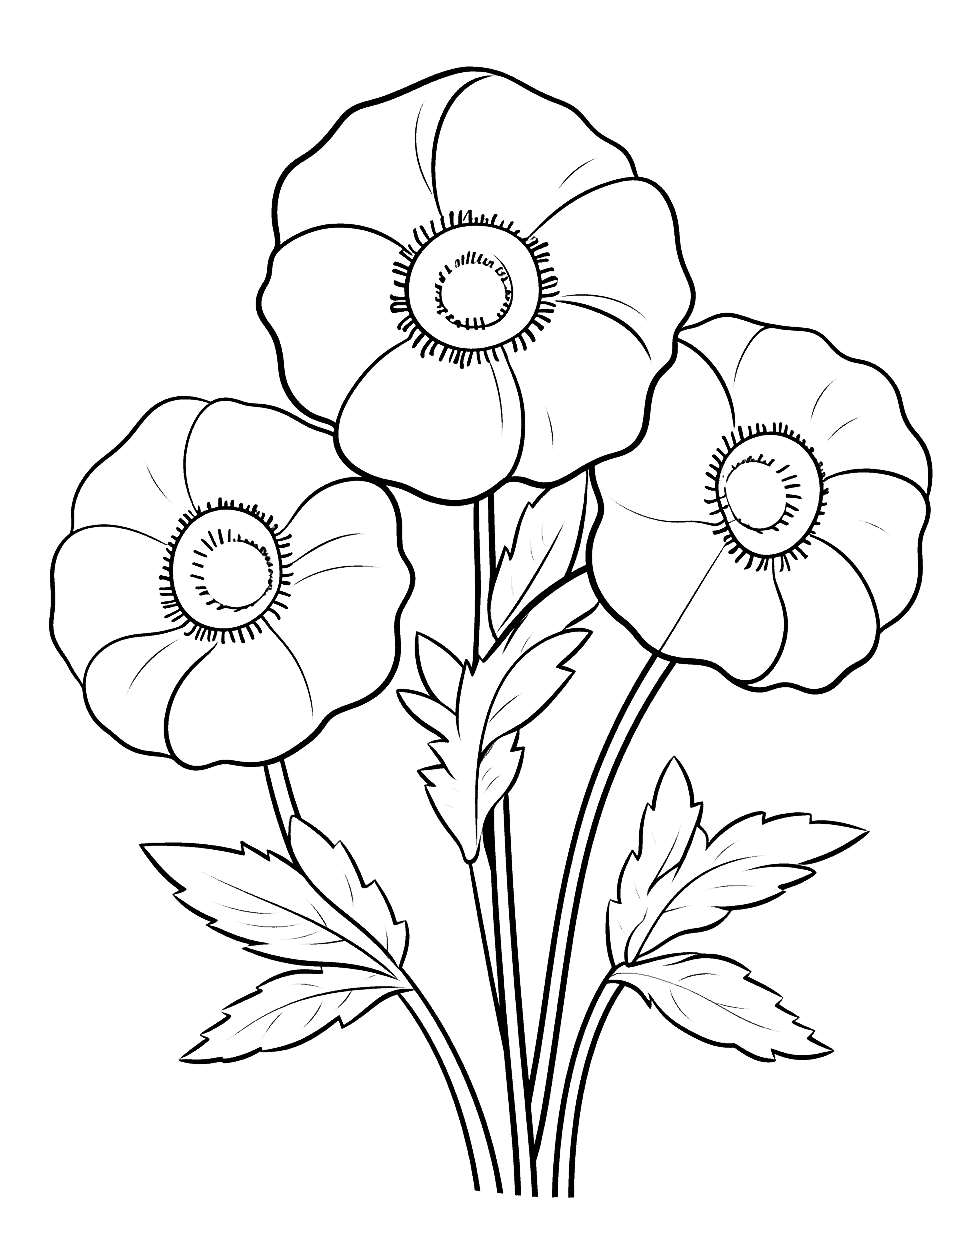 Pretty Preschool Poppies Flower Coloring Page - Simple and pretty poppies for a preschool coloring page.